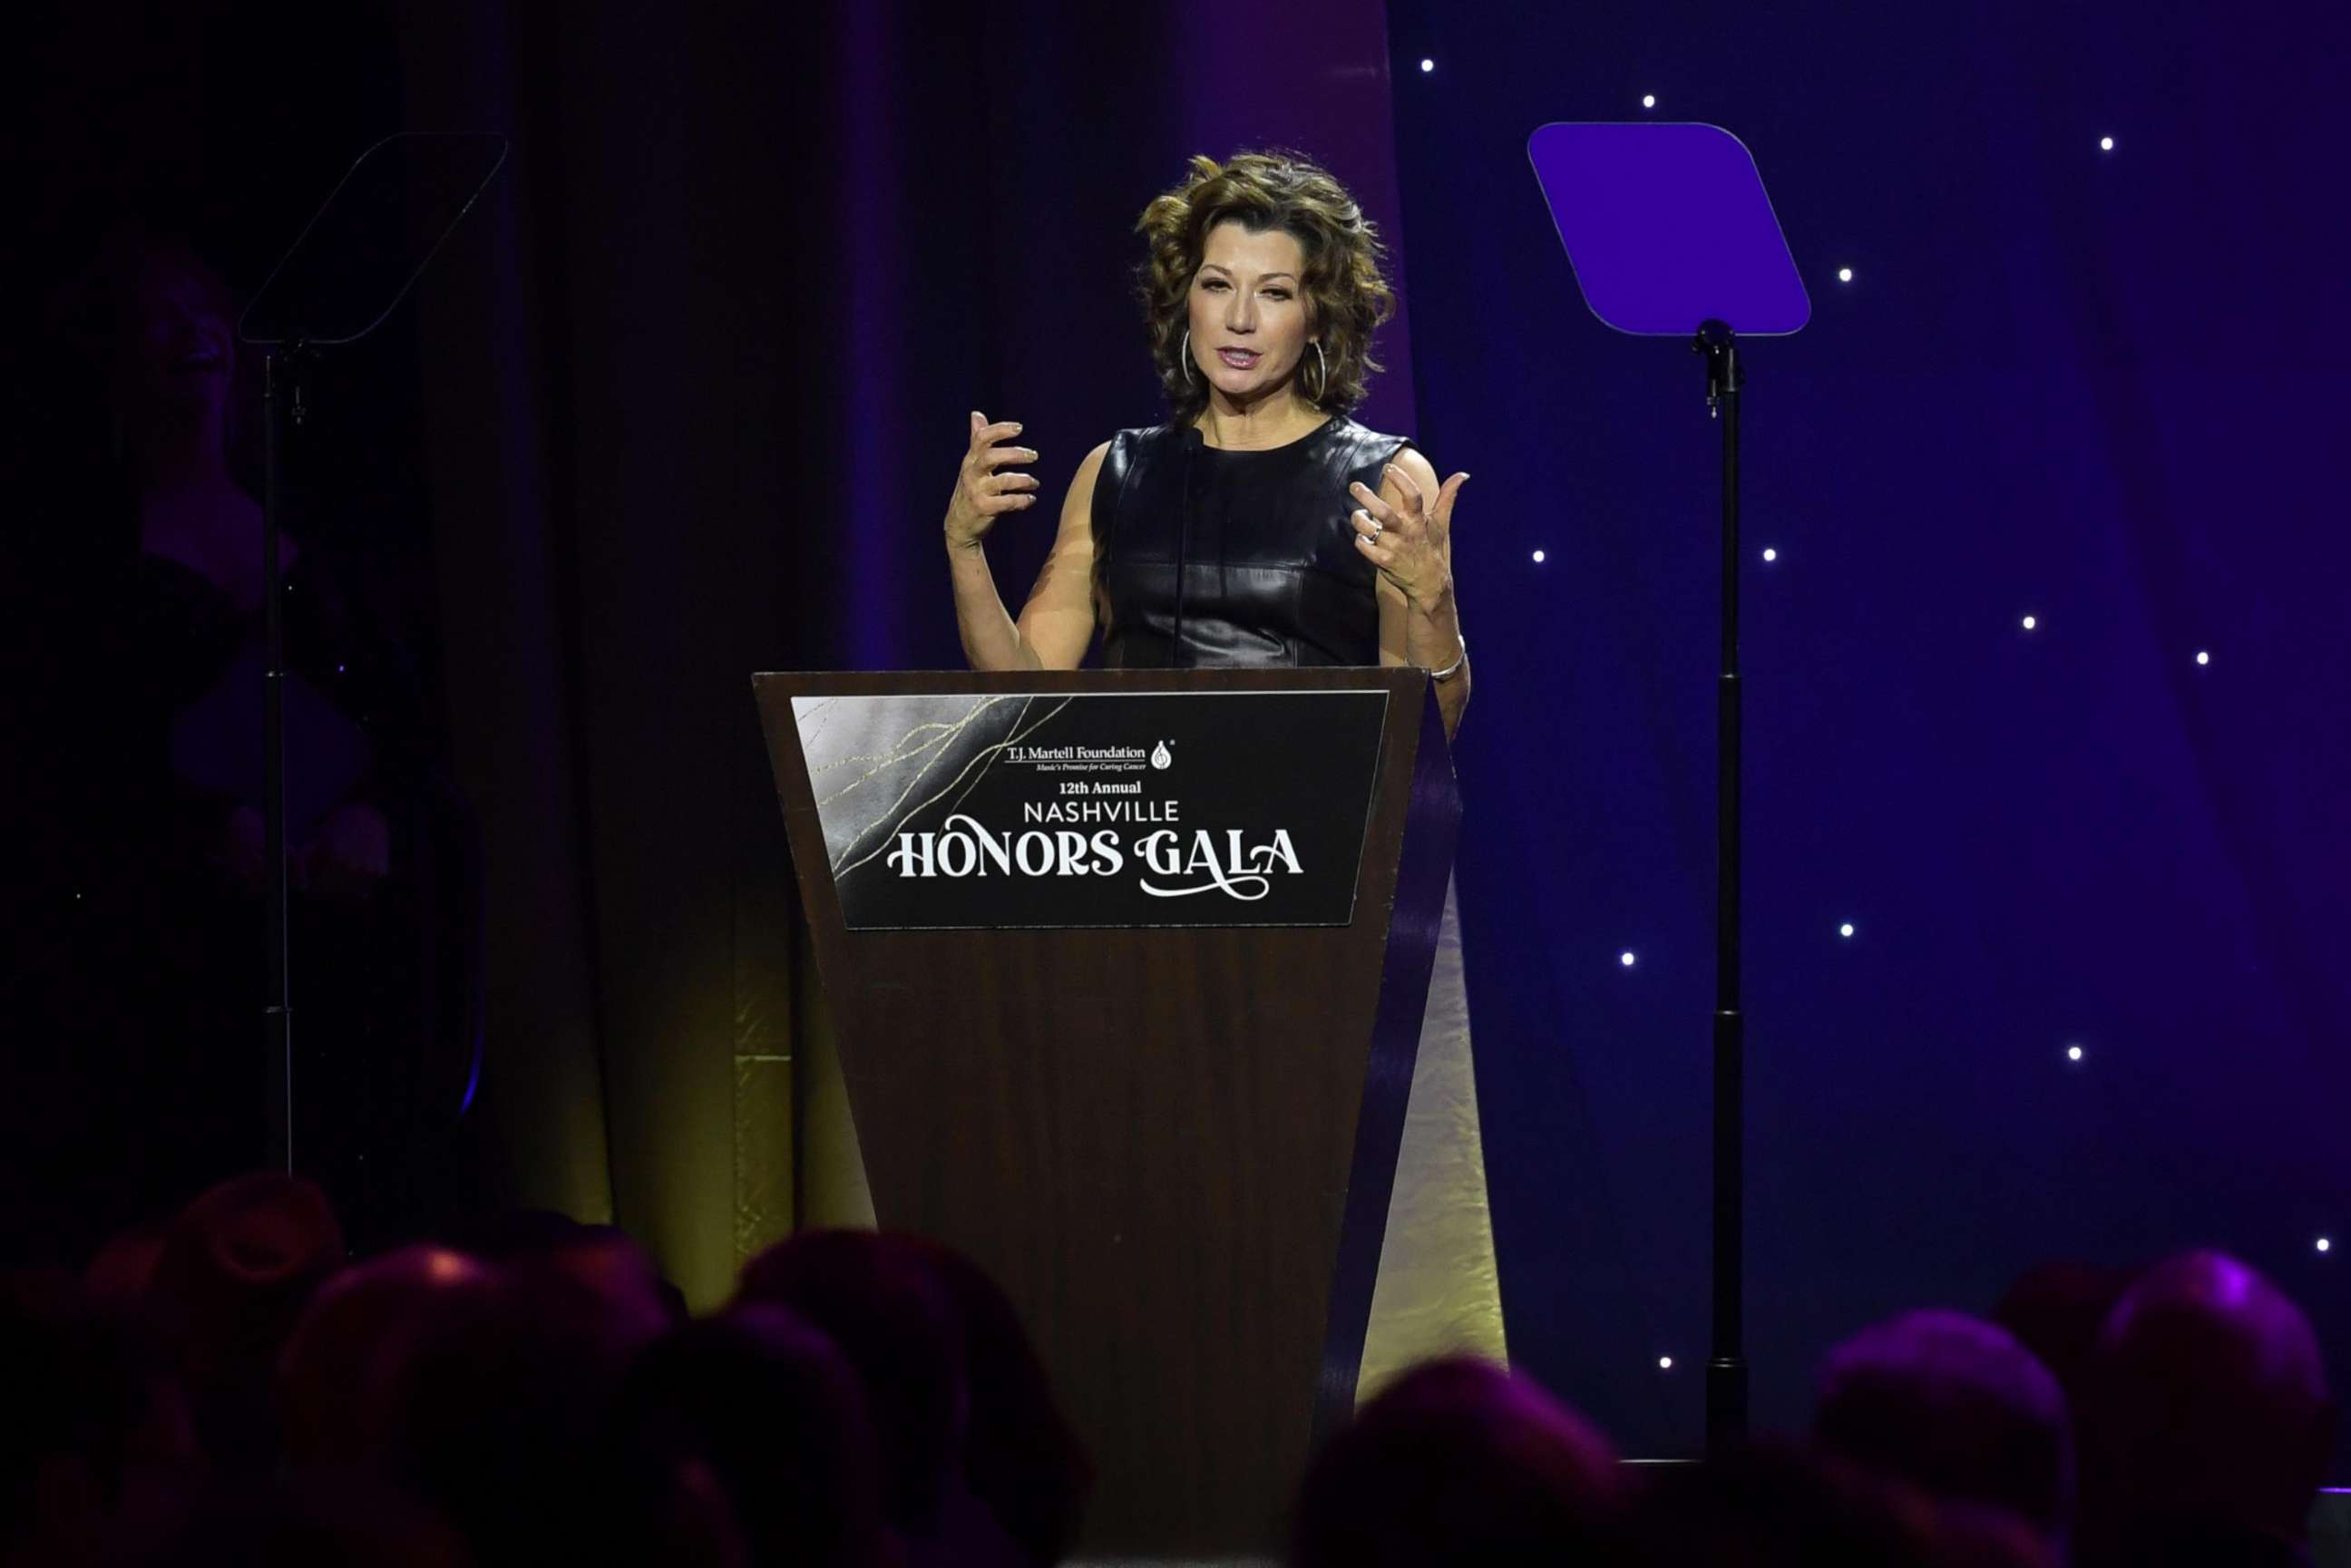 PHOTO: Amy Grant speaks onstage at the 12th Annual T.J. Martell Foundation Nashville Gala, Feb. 24, 2020 in Nashville, Tenn.